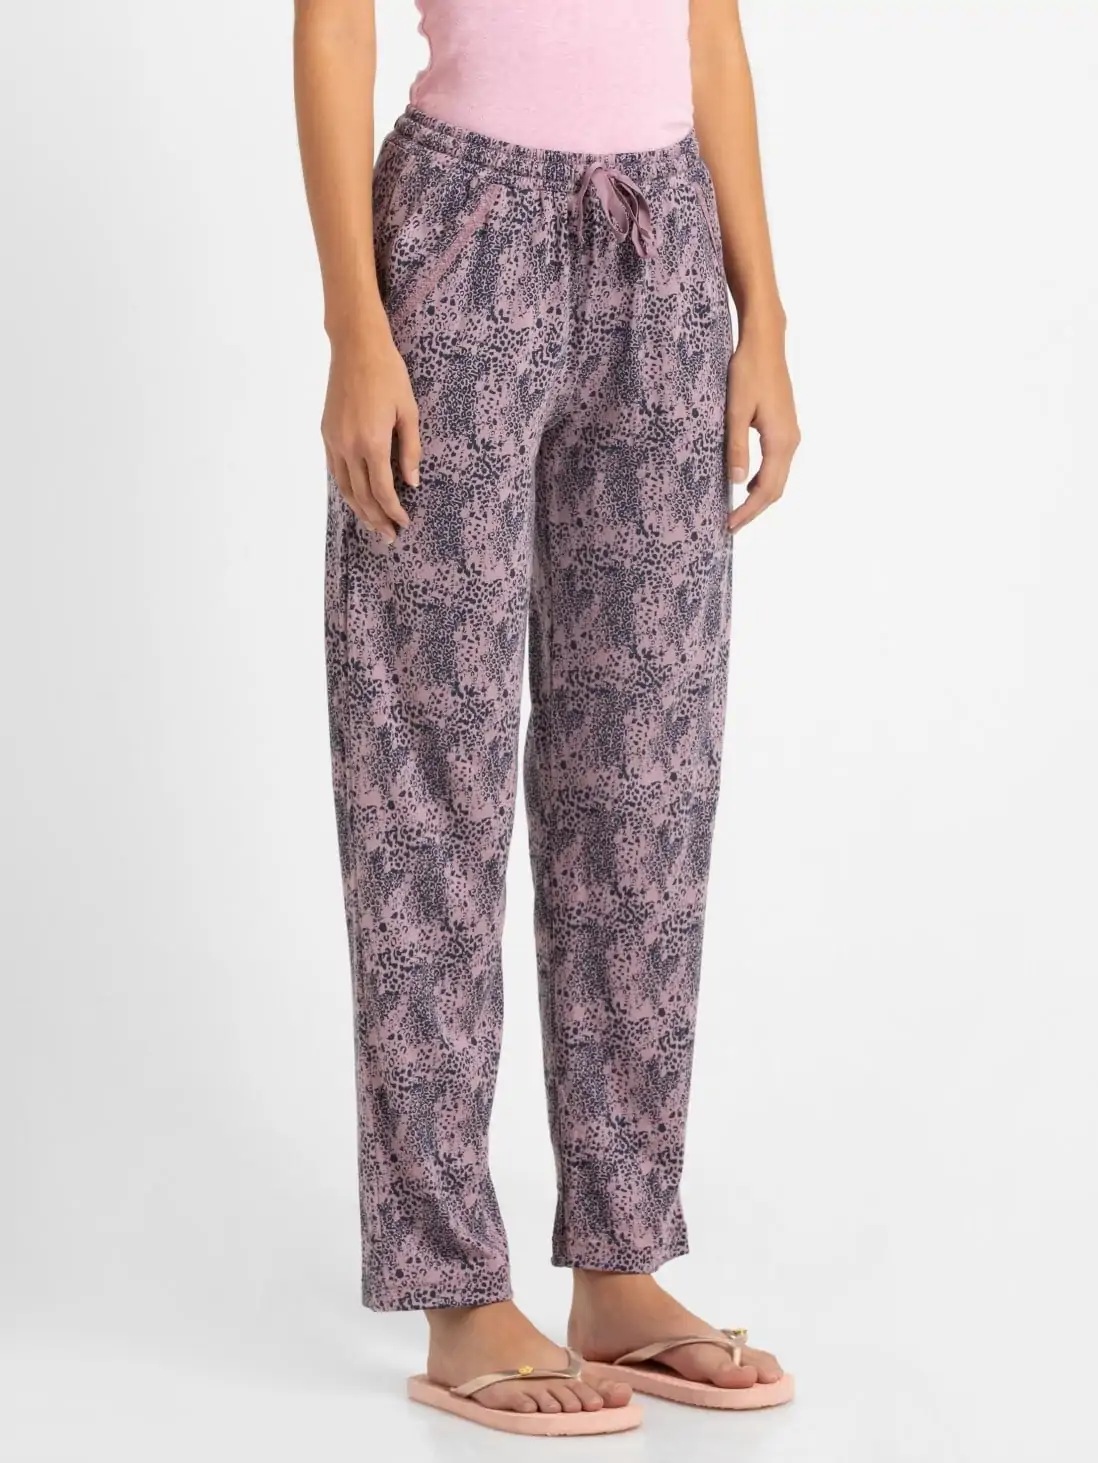 Buy Women's Micro Modal Cotton Relaxed Fit Printed Pyjama with Lace Trim on  Pockets - Iris Blue Assorted Prints RX09 | Jockey India